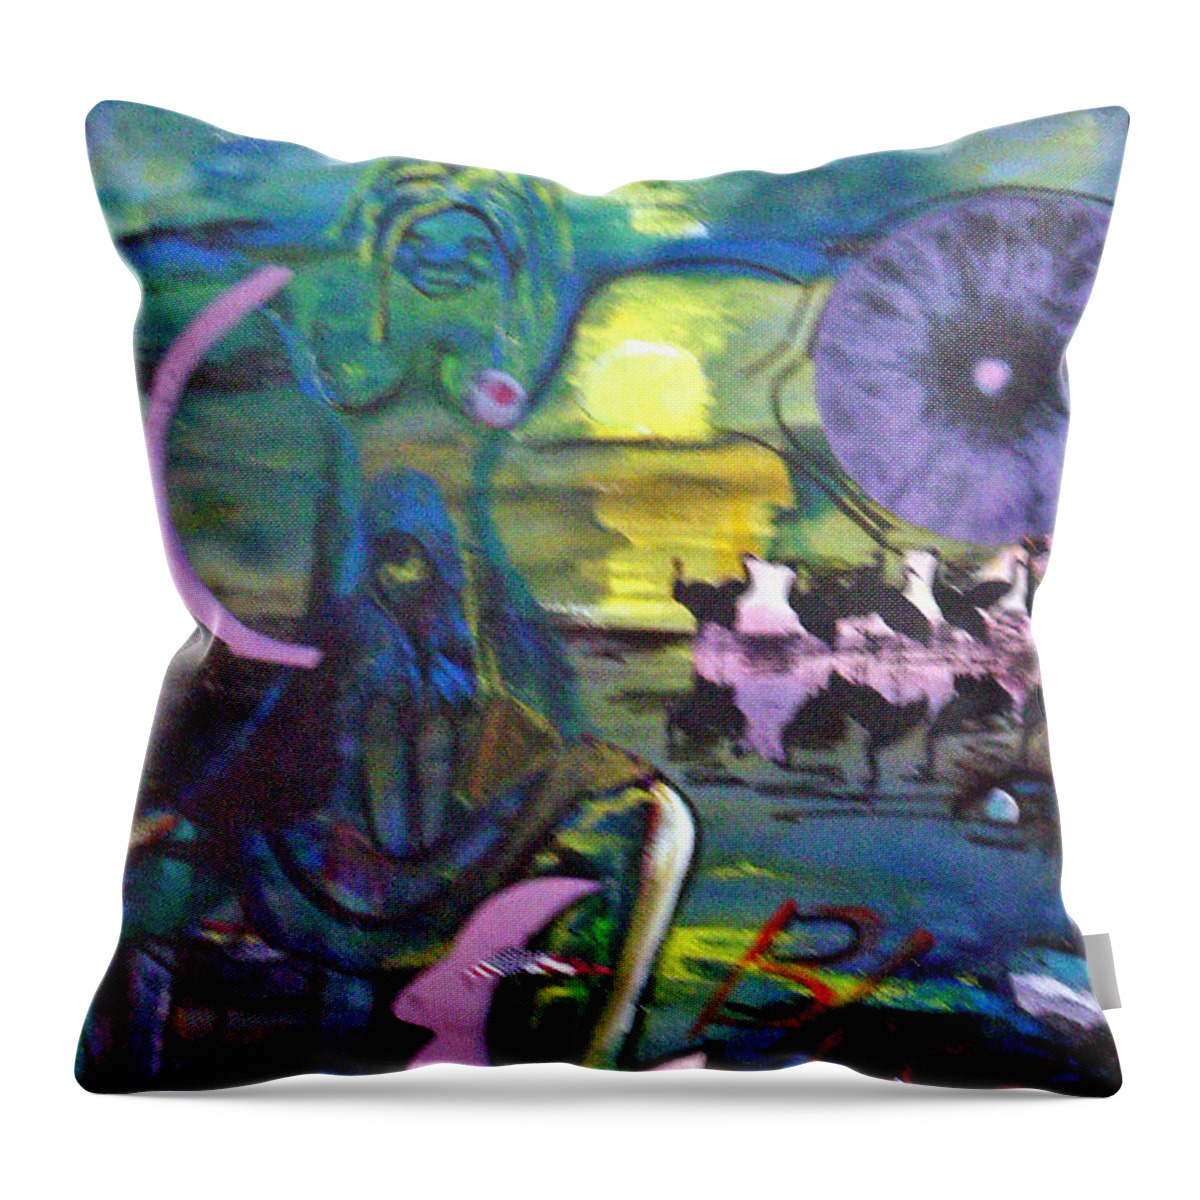 Water Throw Pillow featuring the painting Remembering 9-11 by Peggy Blood